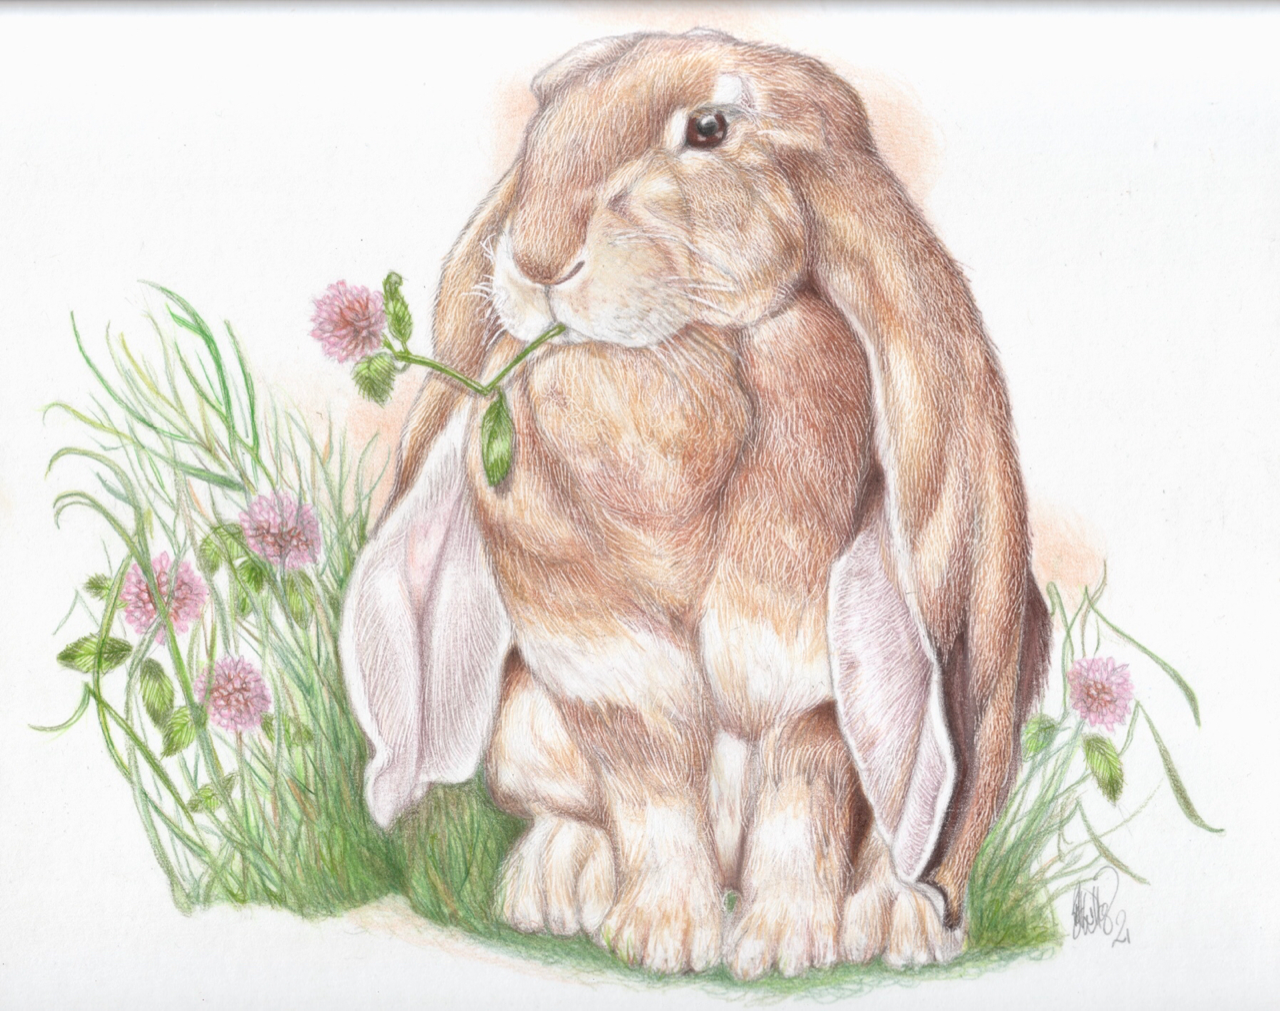 "English Lop" - Greeting Cards  (5x4 inches) hand-signed art cards $5 each